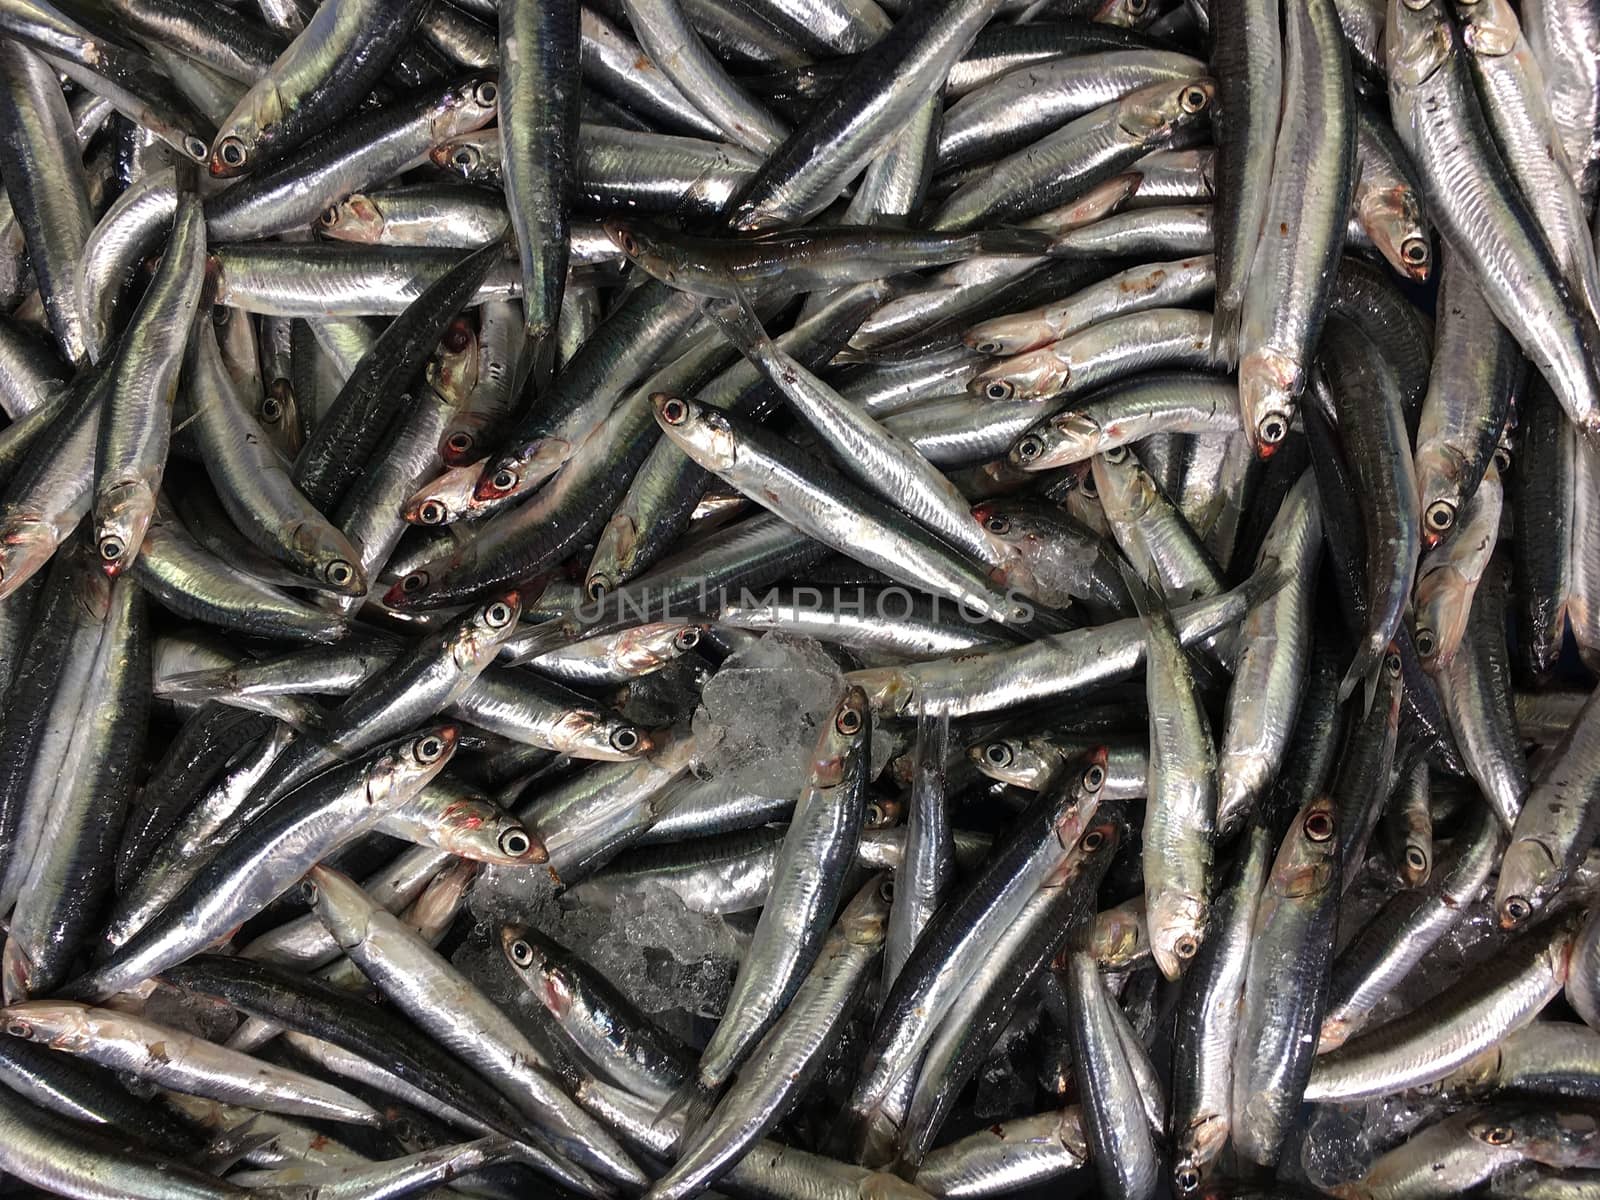 Sprats - Fish for sale on a market stall by SteveAllenPhoto